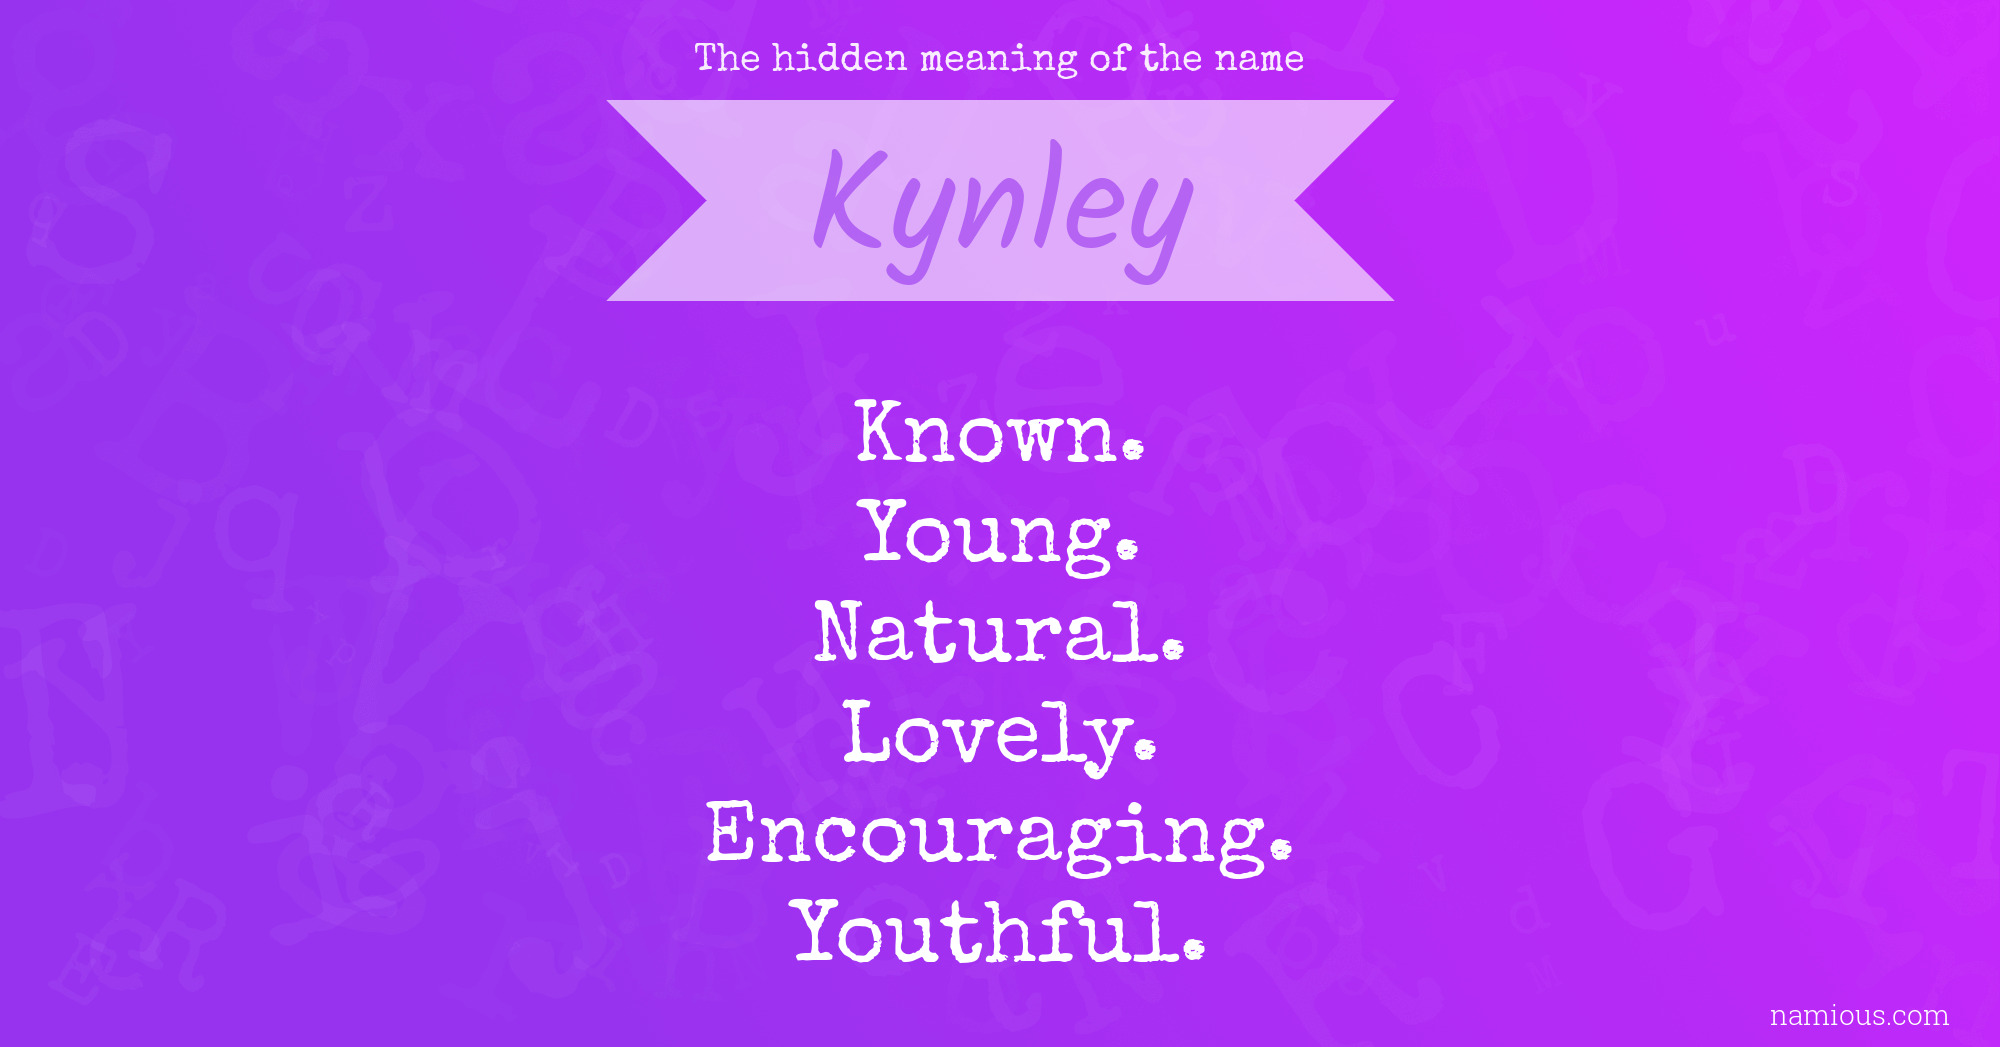 The hidden meaning of the name Kynley